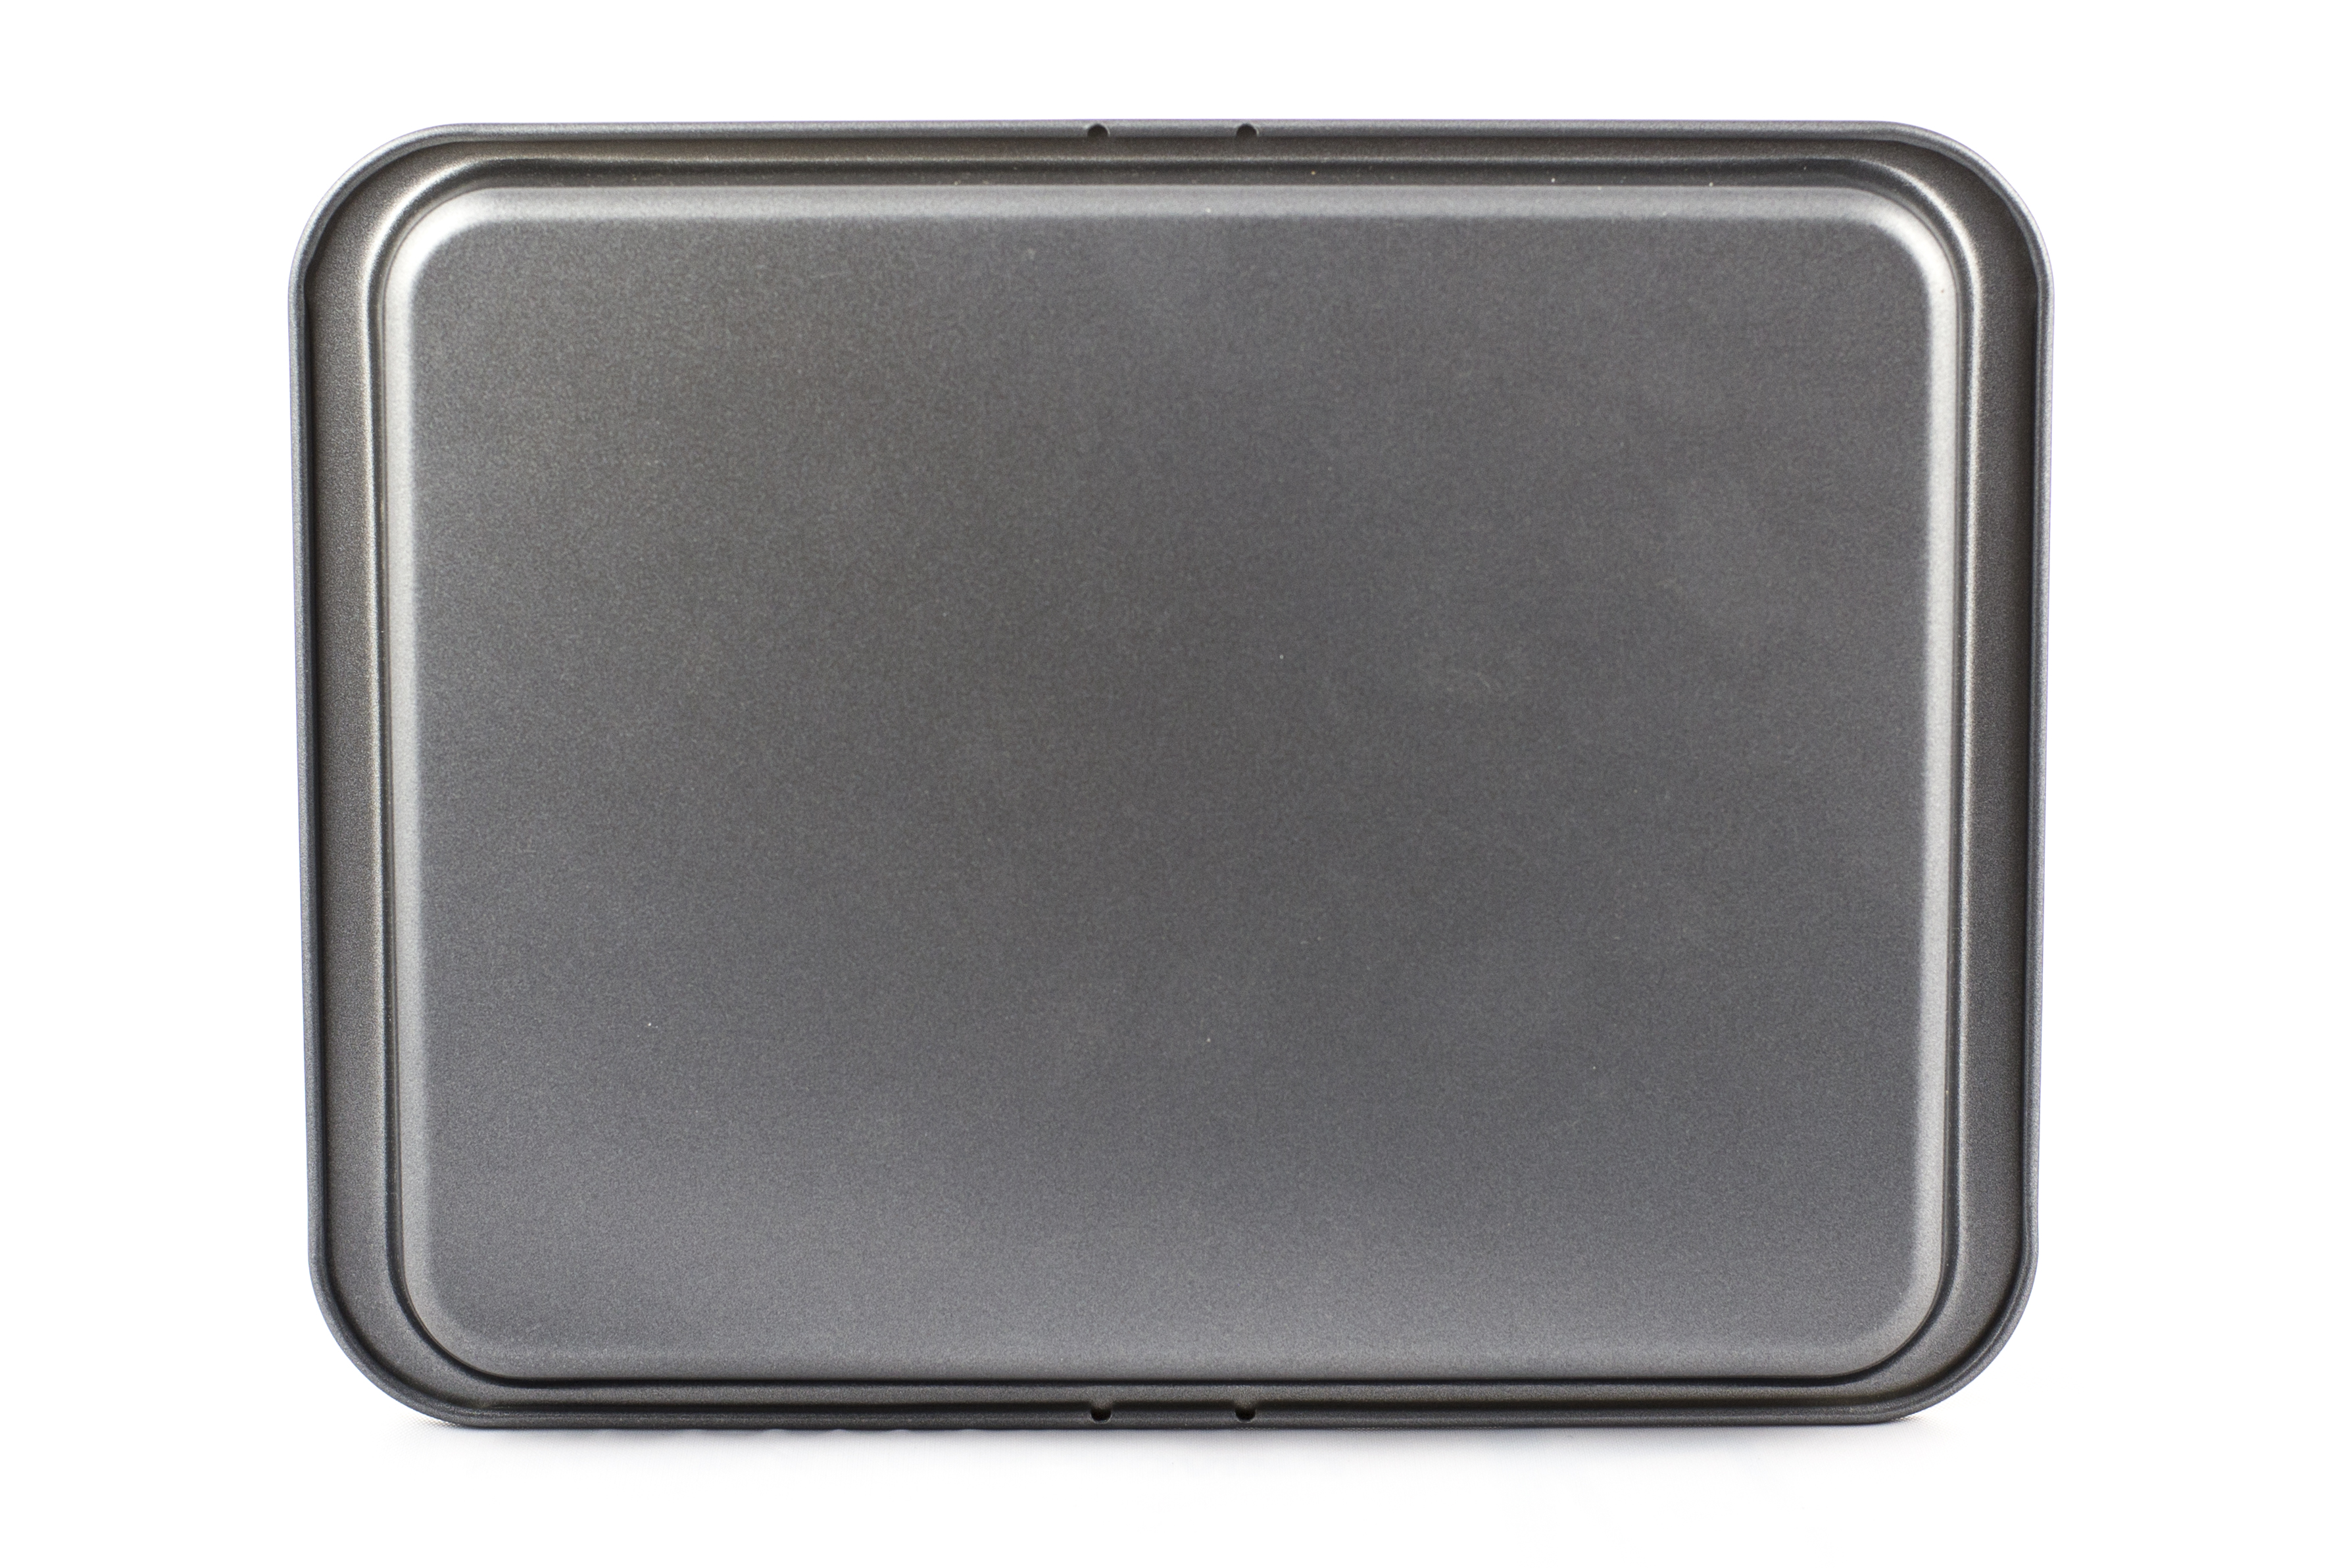 7" x 9" Mini Cookie Sheet Non-Stick Small Toaster Oven Pan Bakeware Replacement - image 2 of 3